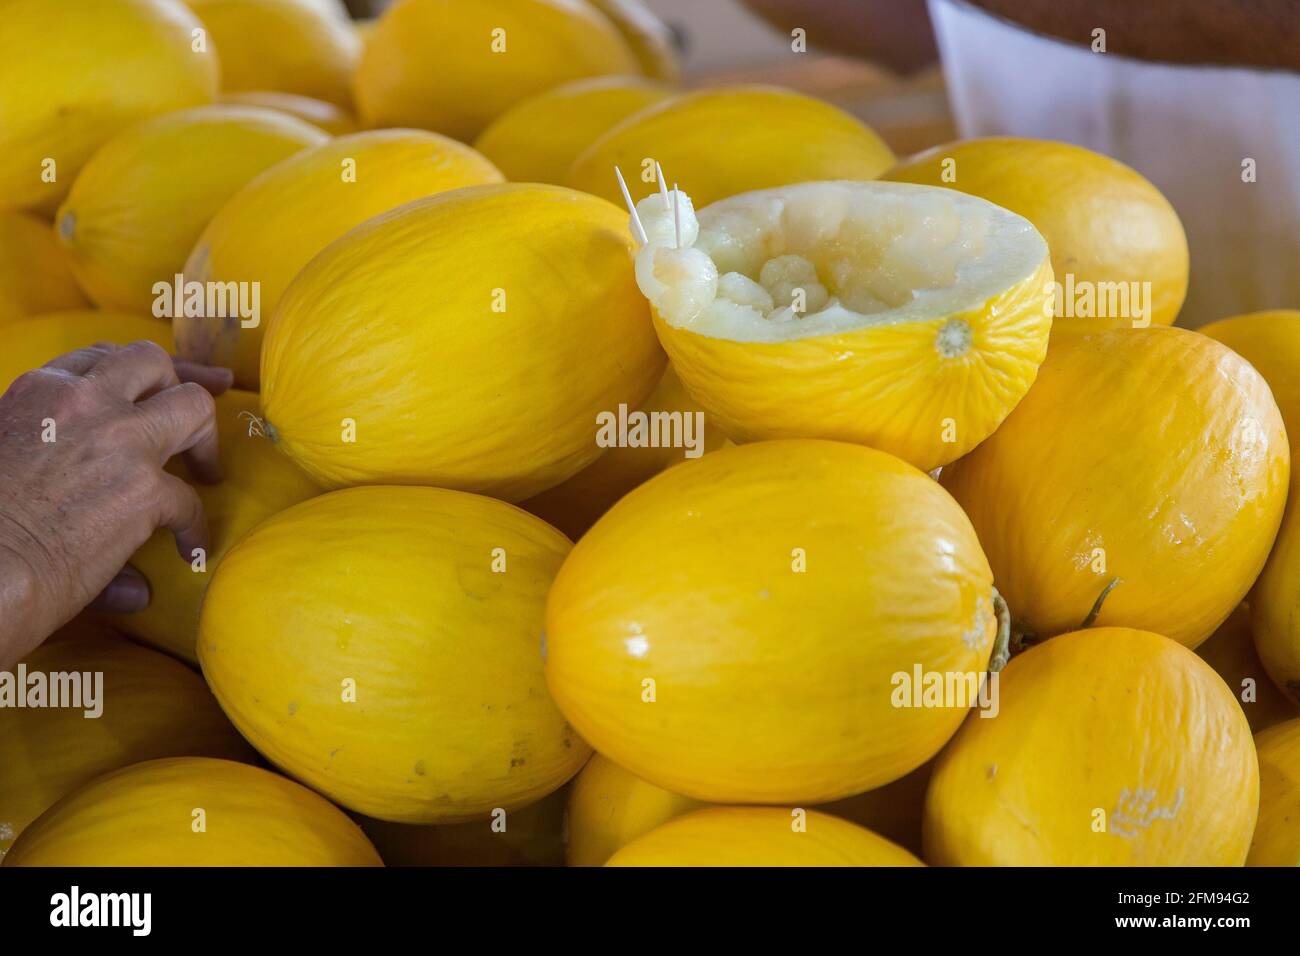 Yellow melons at the market Stock Photo